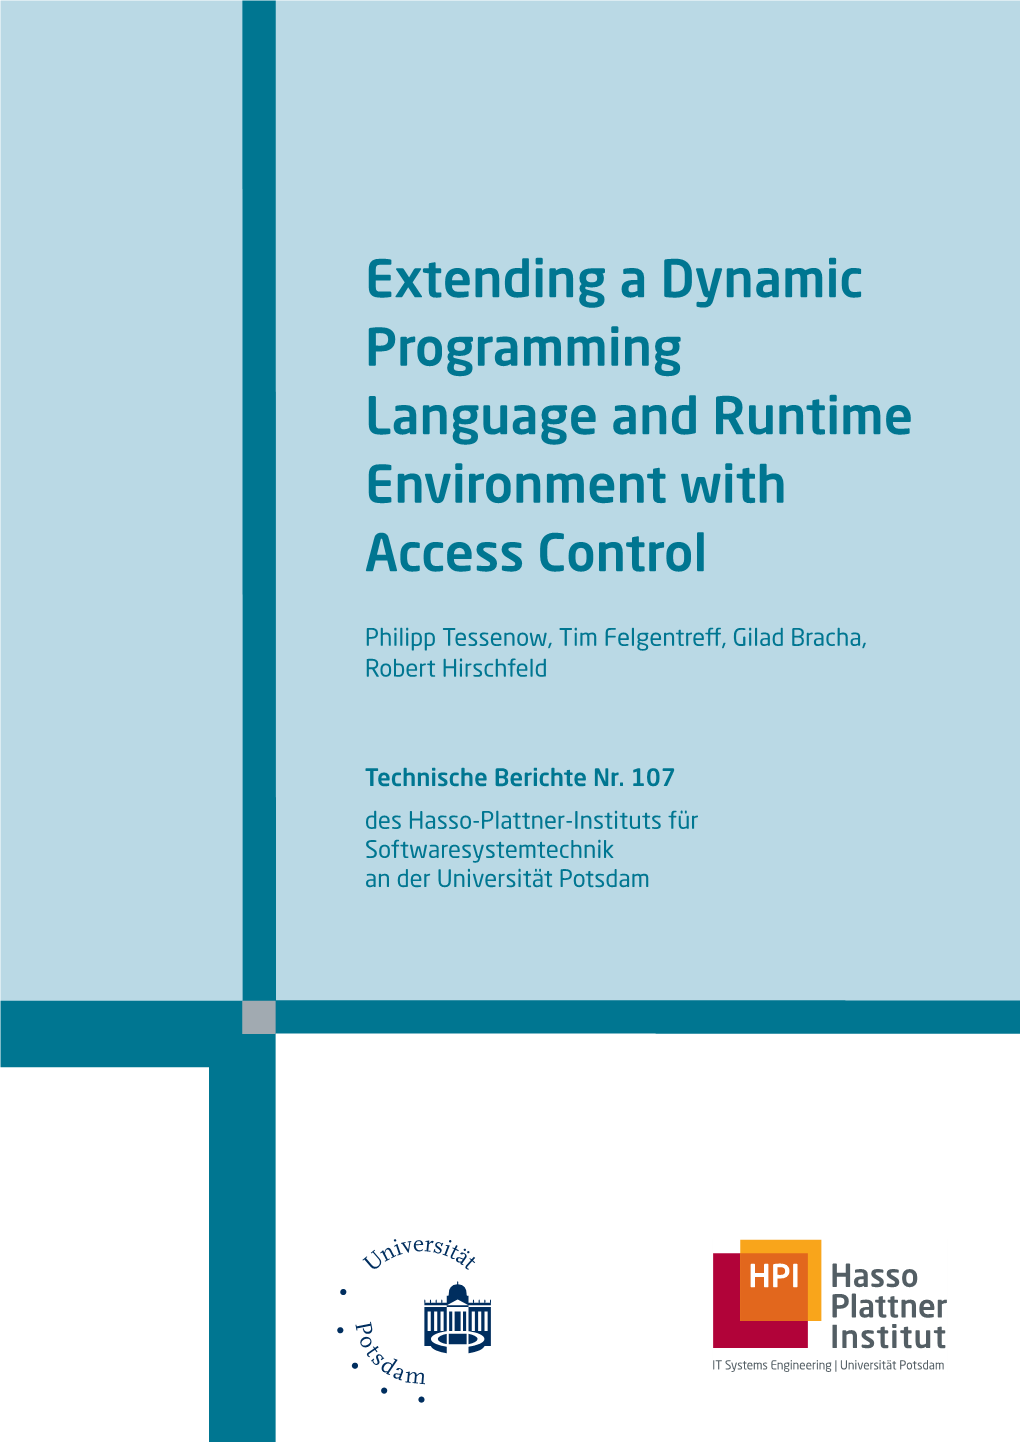 Extending a Dynamic Programming Language and Runtime Environment with Access Control